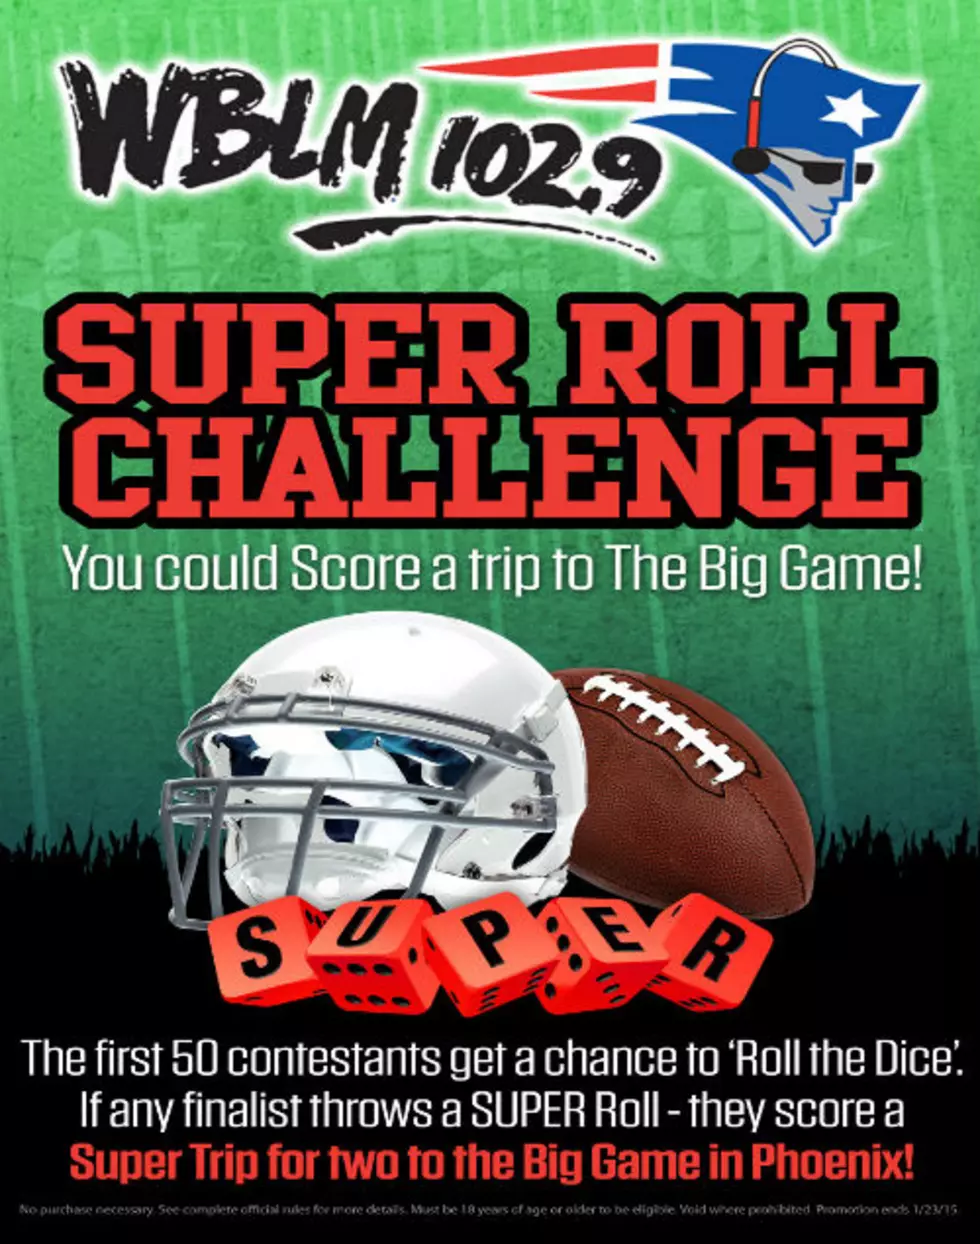 ‘Super Roll’ Your Way to the Big Game Friday!